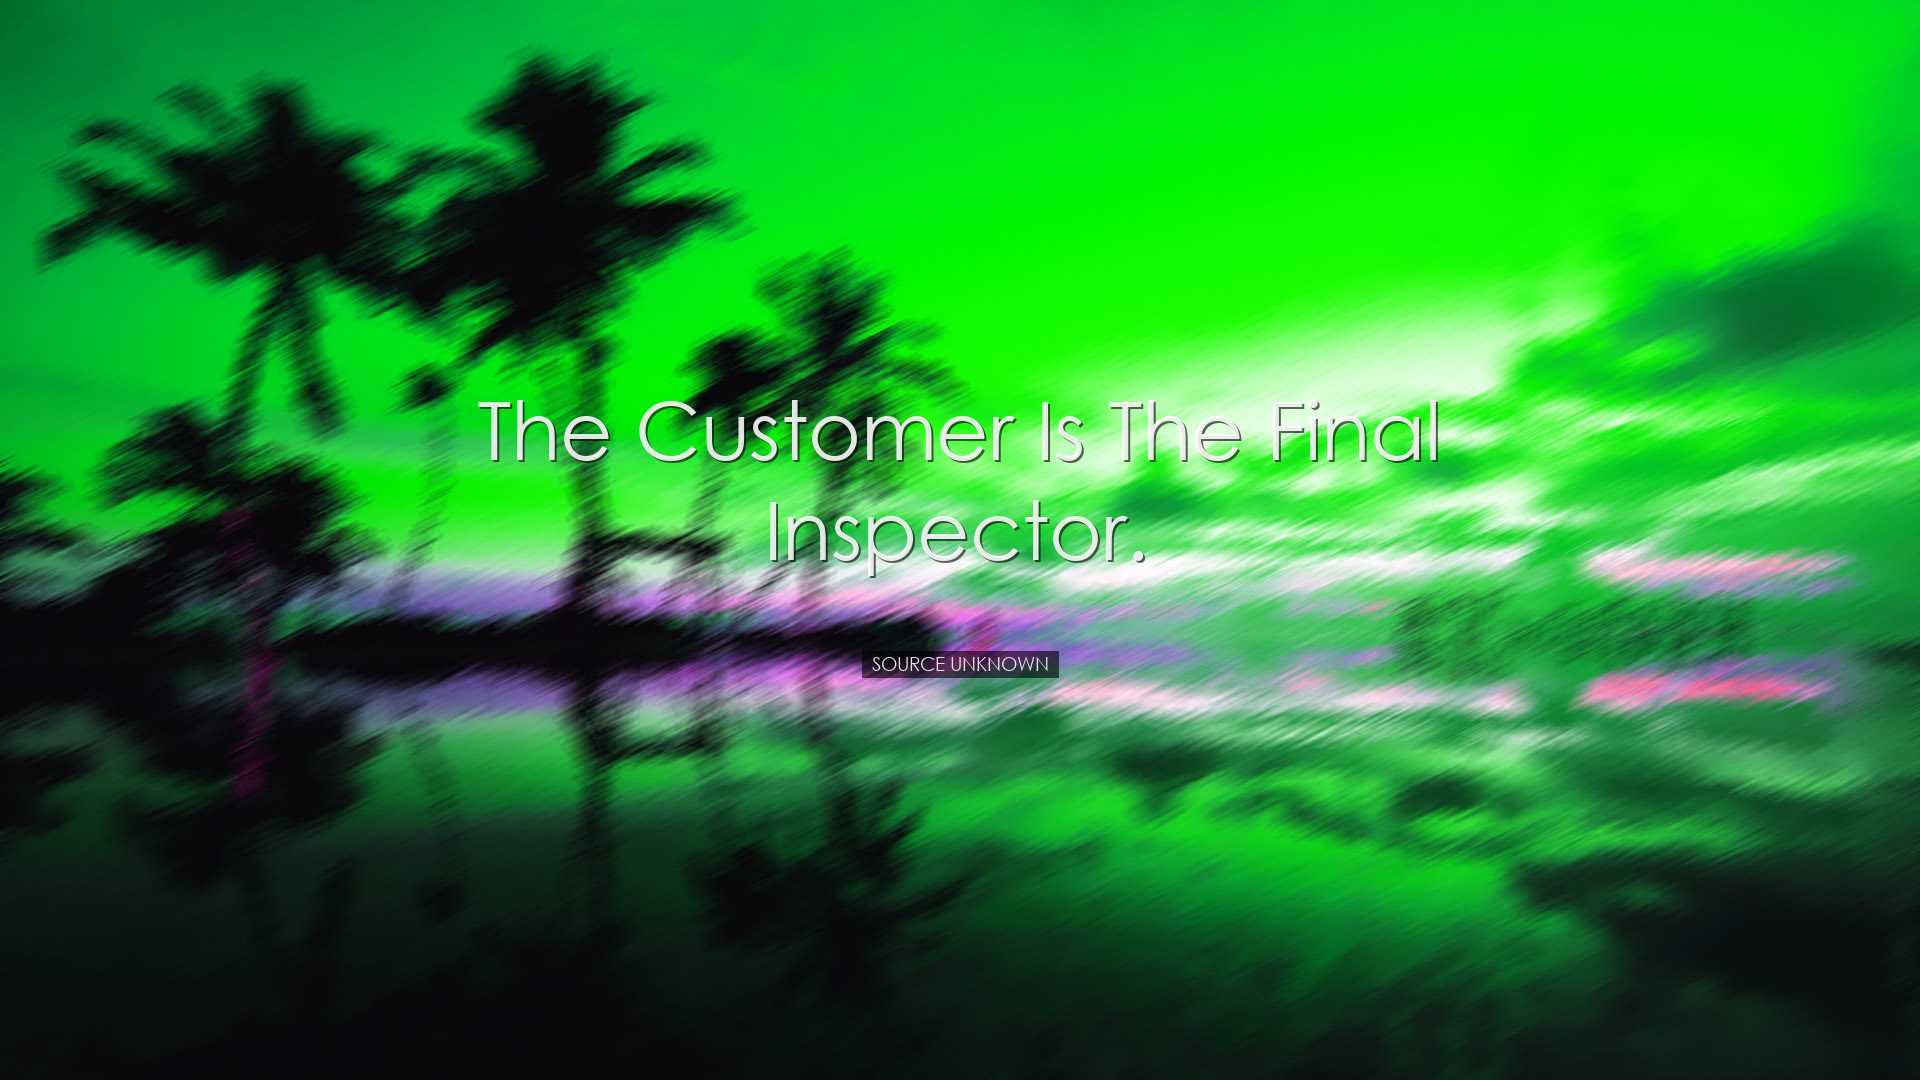 The customer is the final inspector. - Source Unknown